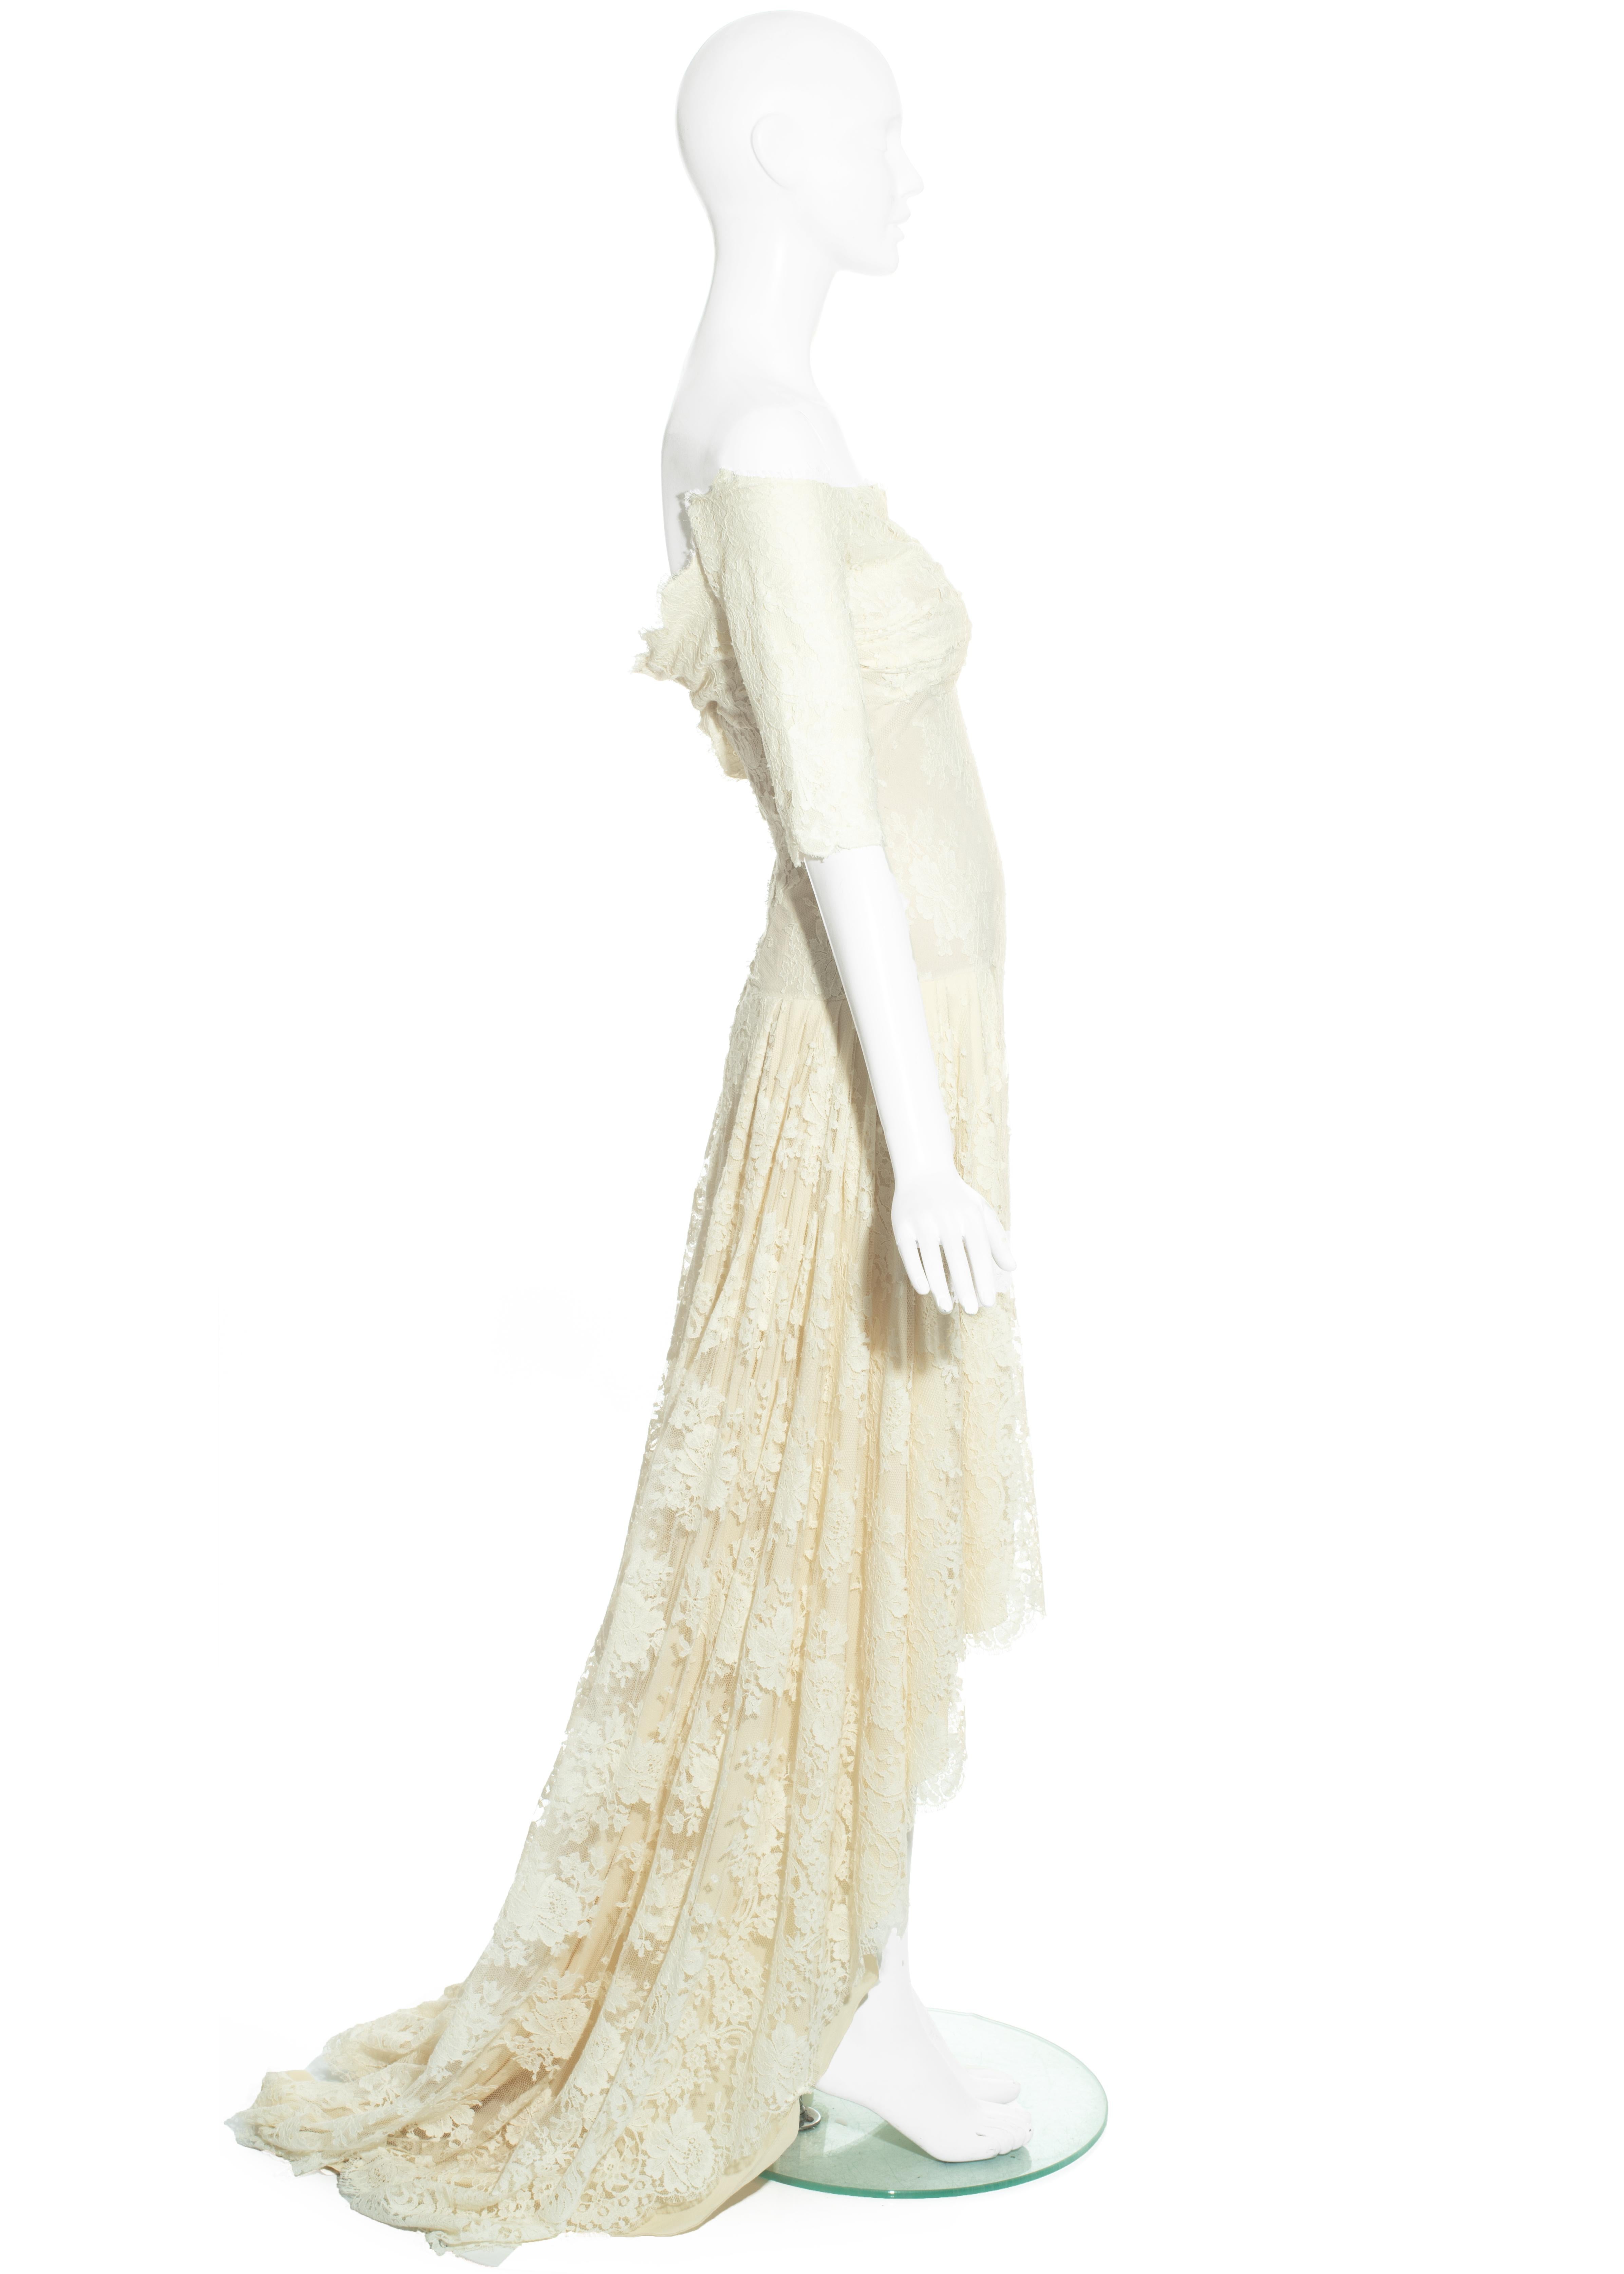 Alexander McQueen ivory lace corseted trained evening dress, 'Sarabande' ss 2007 1